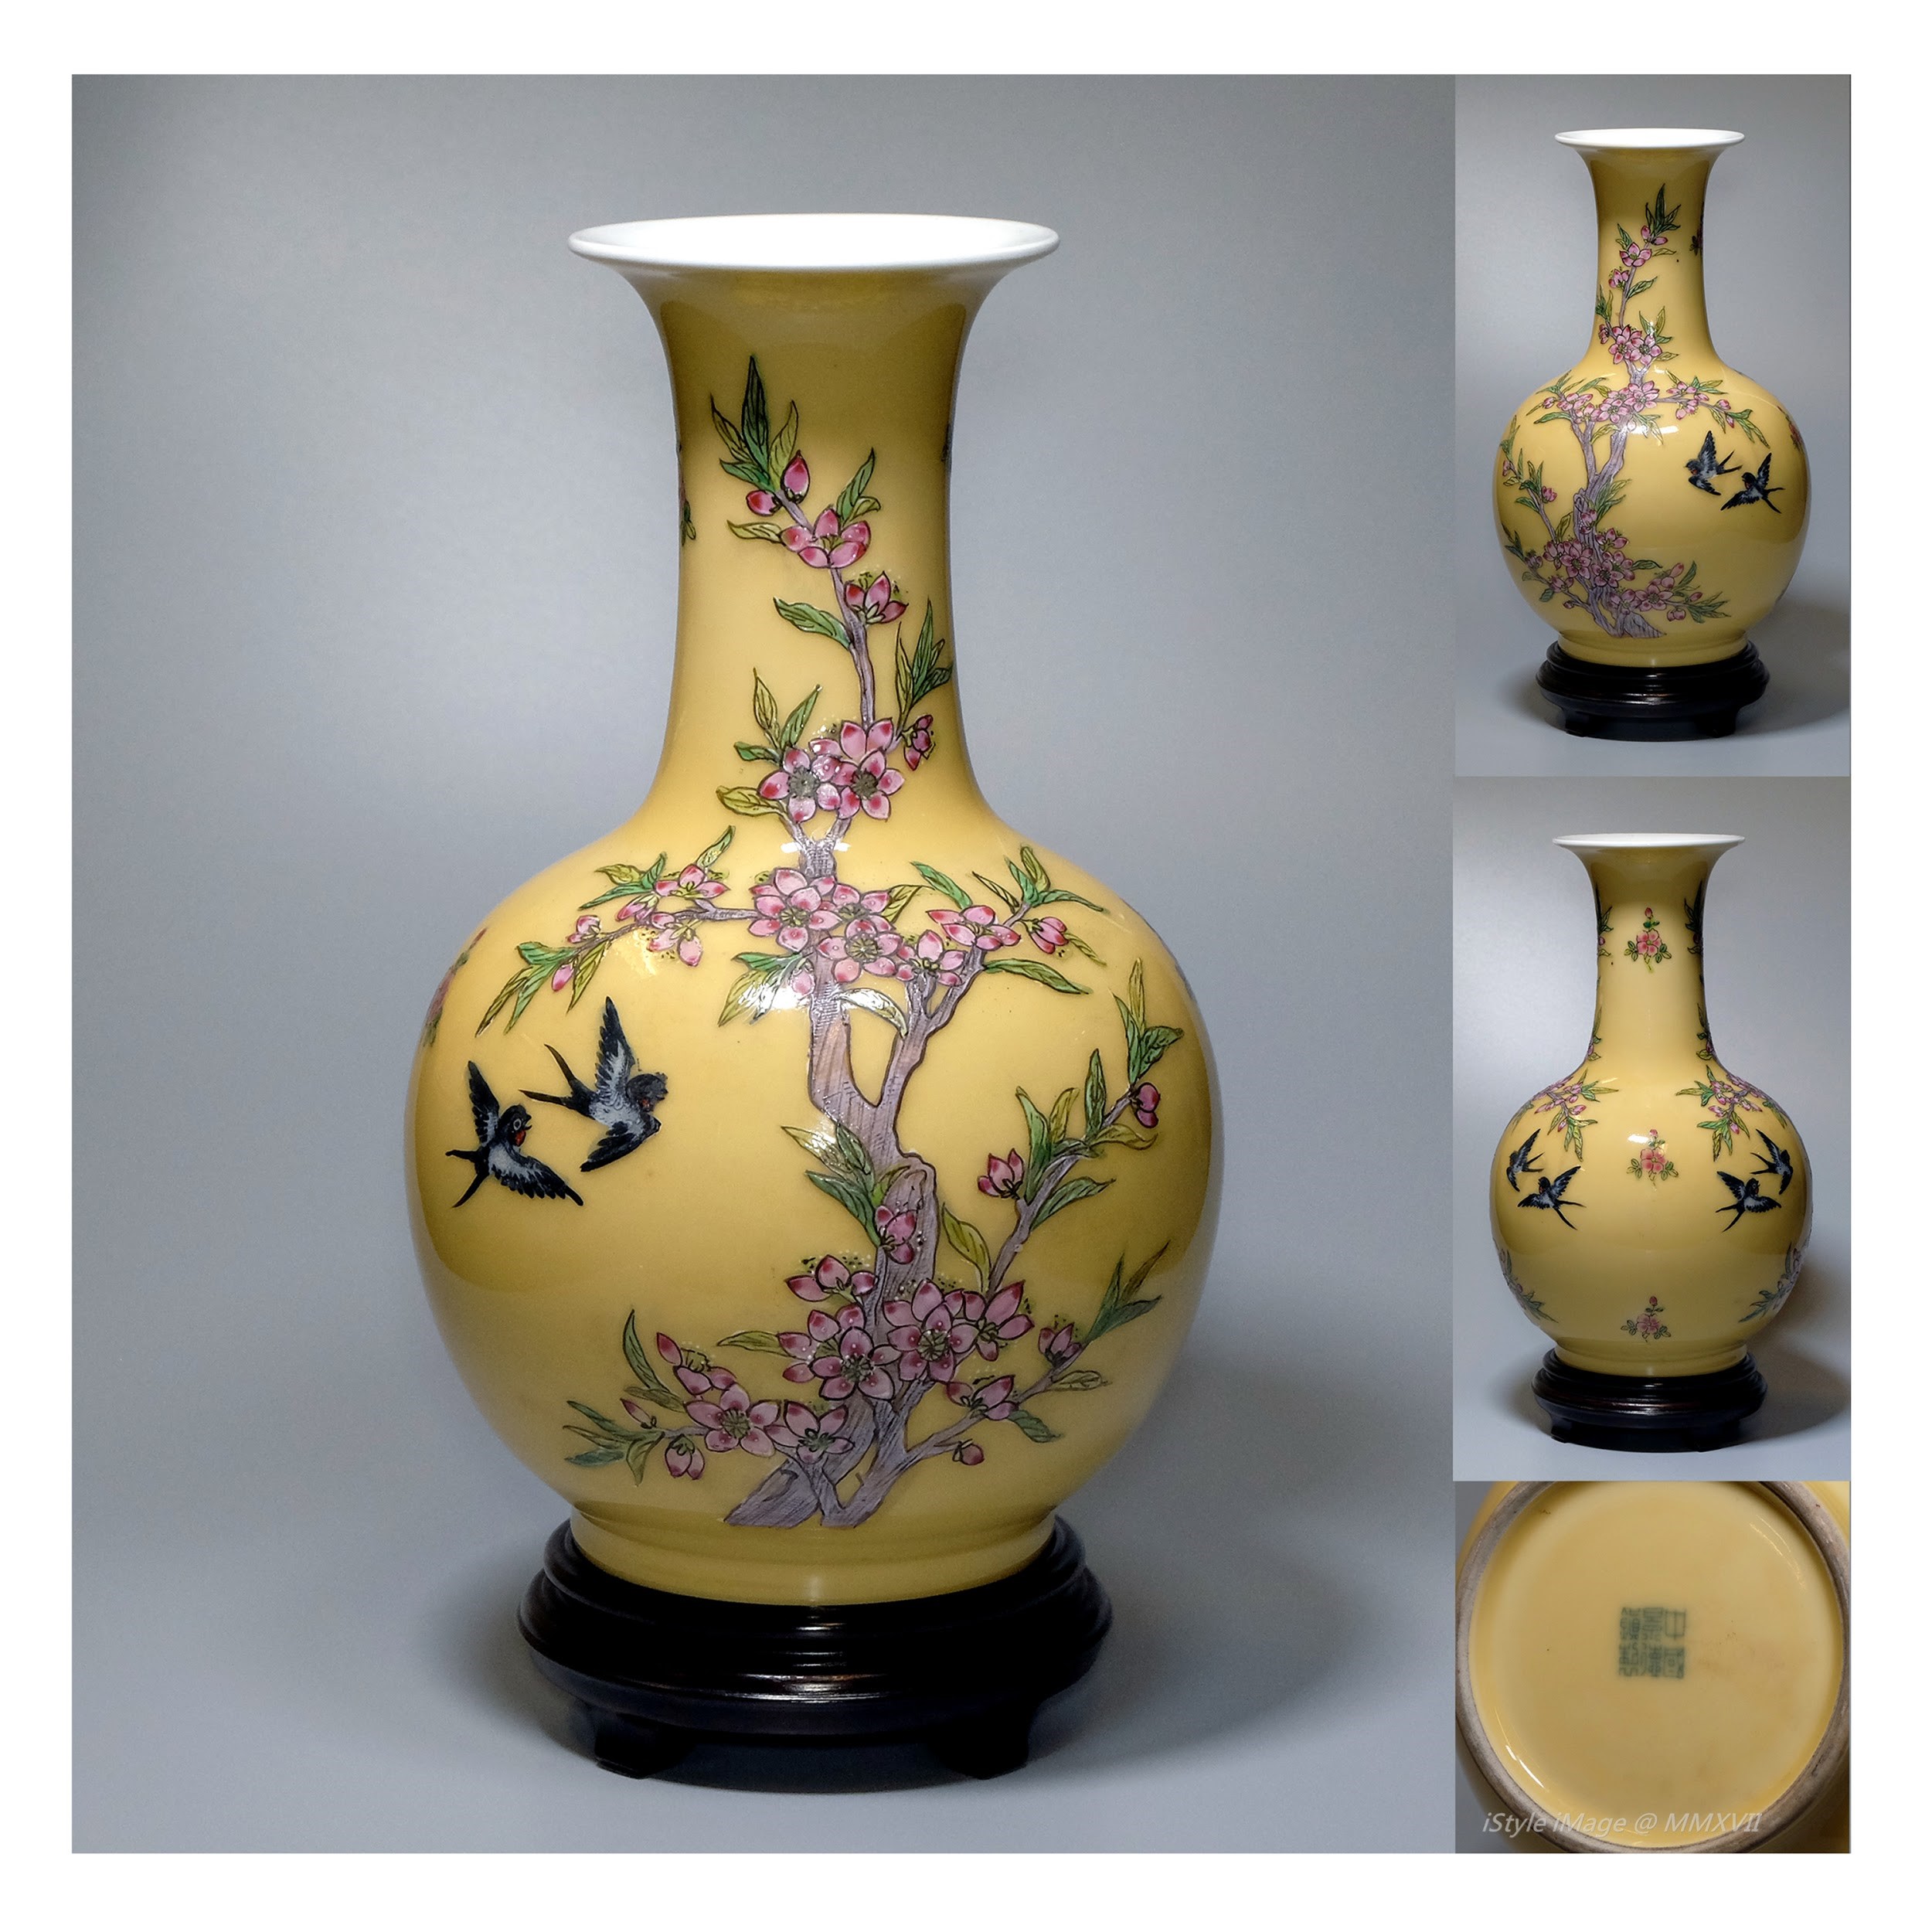 <br><h4>Lot 14 : An elegant famille-verte globular-shaped form vase  ( 50's last century )</h4>
					The globular-shaped body gently to an elegant slender neck with the everted rim, enameled with two flying swallows to the blooming magnolia flower tree reserved on a bright amber yellow ground.  The base glazed inscribed with six character [Zhōngguó jǐngdézhèn zhì]   
					<br>Measurements (H) high 28 CM, (W)width 17 CM<br><br><br>優雅的五彩黃球形花瓶  ( 上世紀五十年代 )<br>五彩球形的瓶身輕輕地到一個優雅細長的頸部與外翻邊緣，一對燕子飛到盛開的玉蘭花樹，瓶身完全繪上明亮的琥珀黃色。 底款[中國景德鎮製]<br>尺寸(H)高 28 厘米,  (W)濶17 厘米